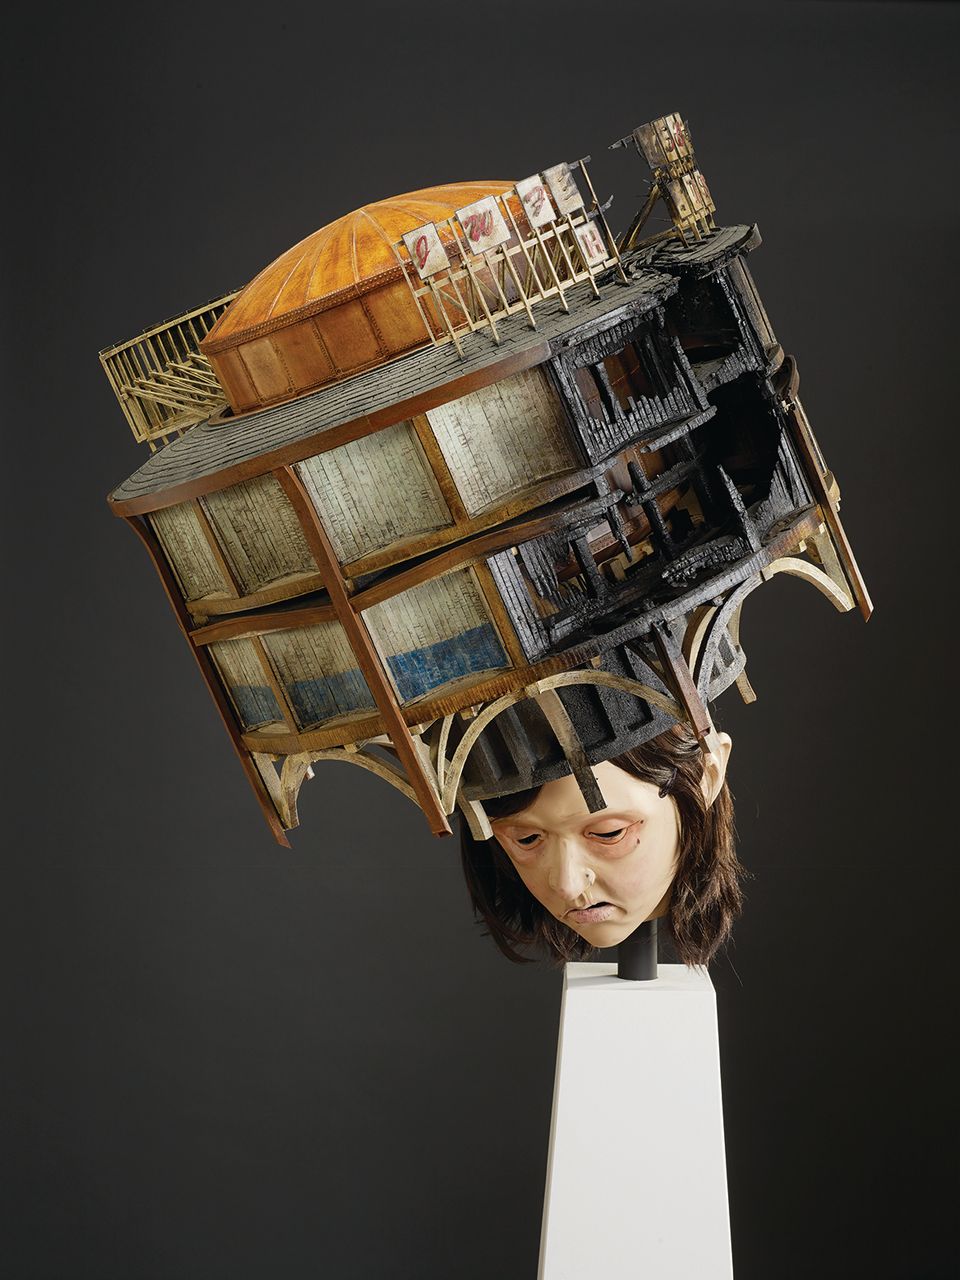 An image of a sculpture with a building on a human head.